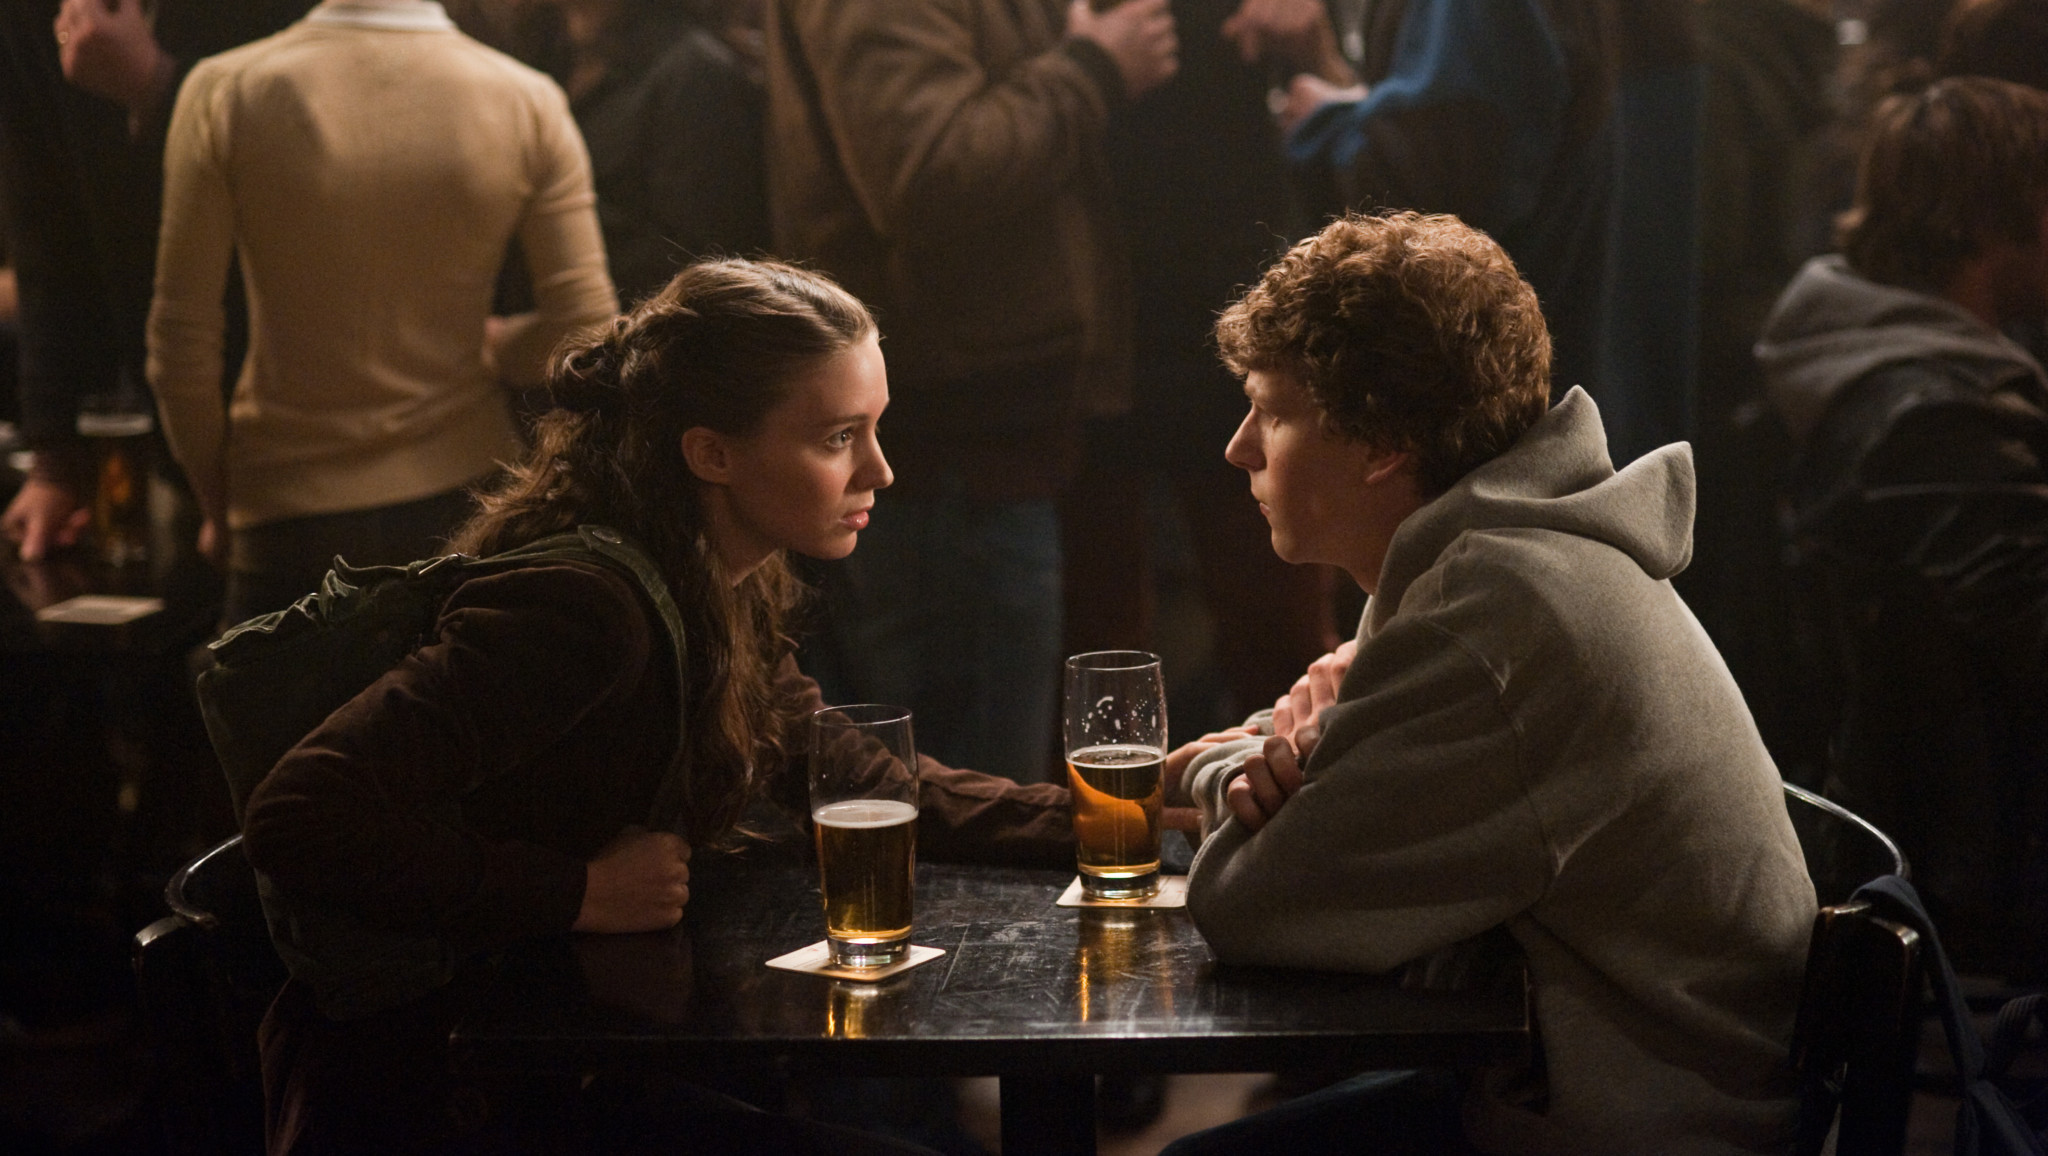 Rooney Mara, left, and Jesse Eisenberg in Columbia Pictures' "The Social Network."